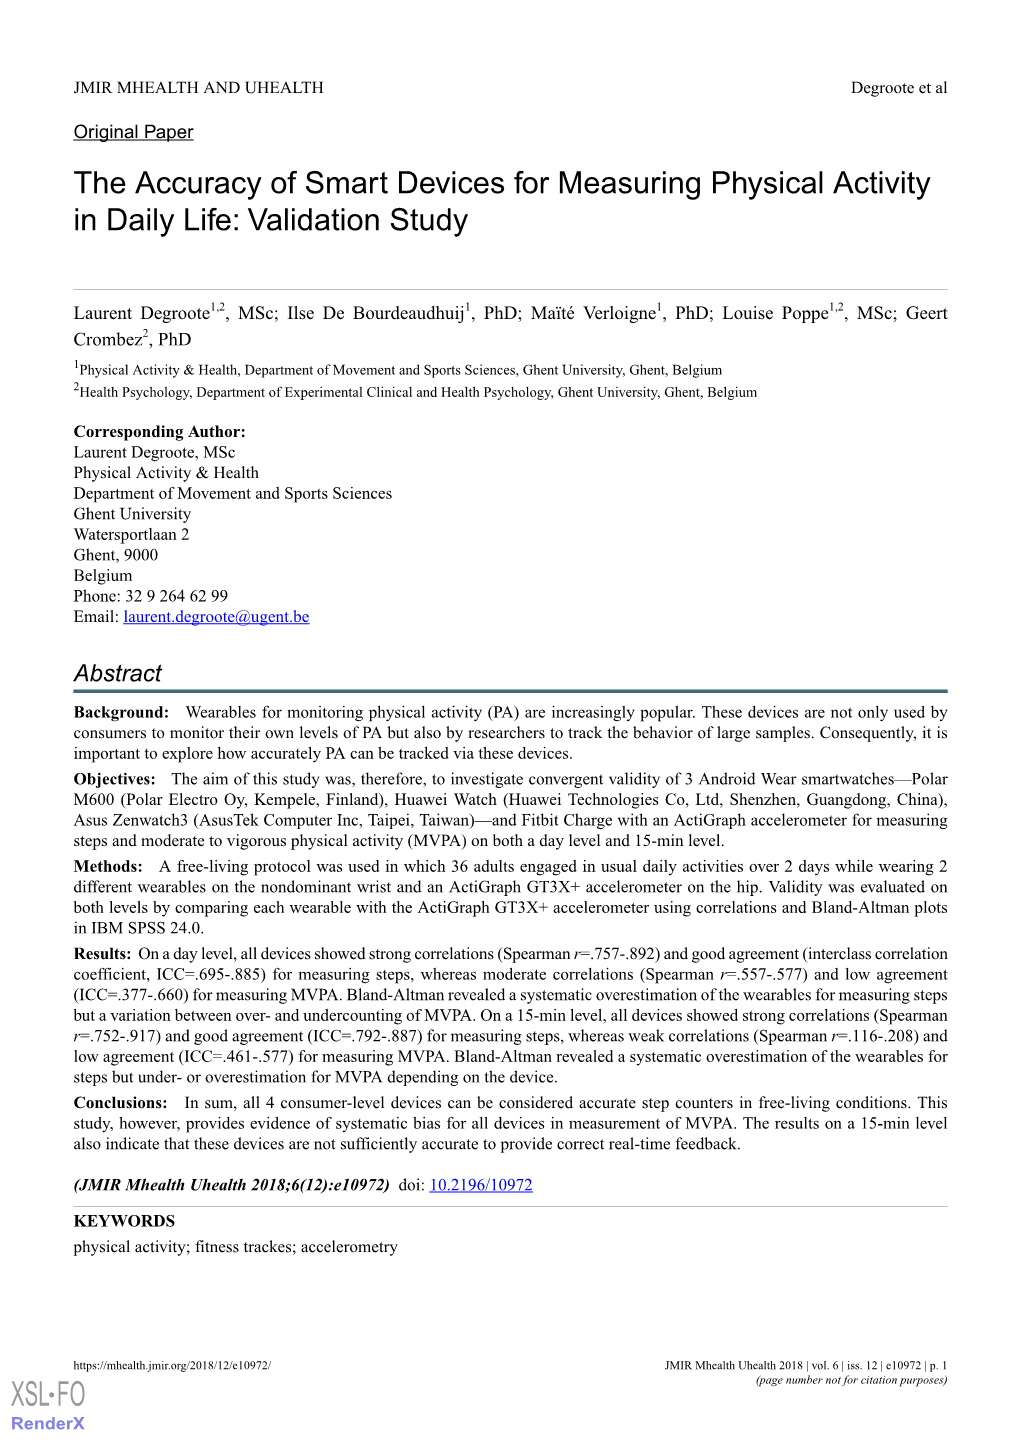 The Accuracy of Smart Devices for Measuring Physical Activity in Daily Life: Validation Study